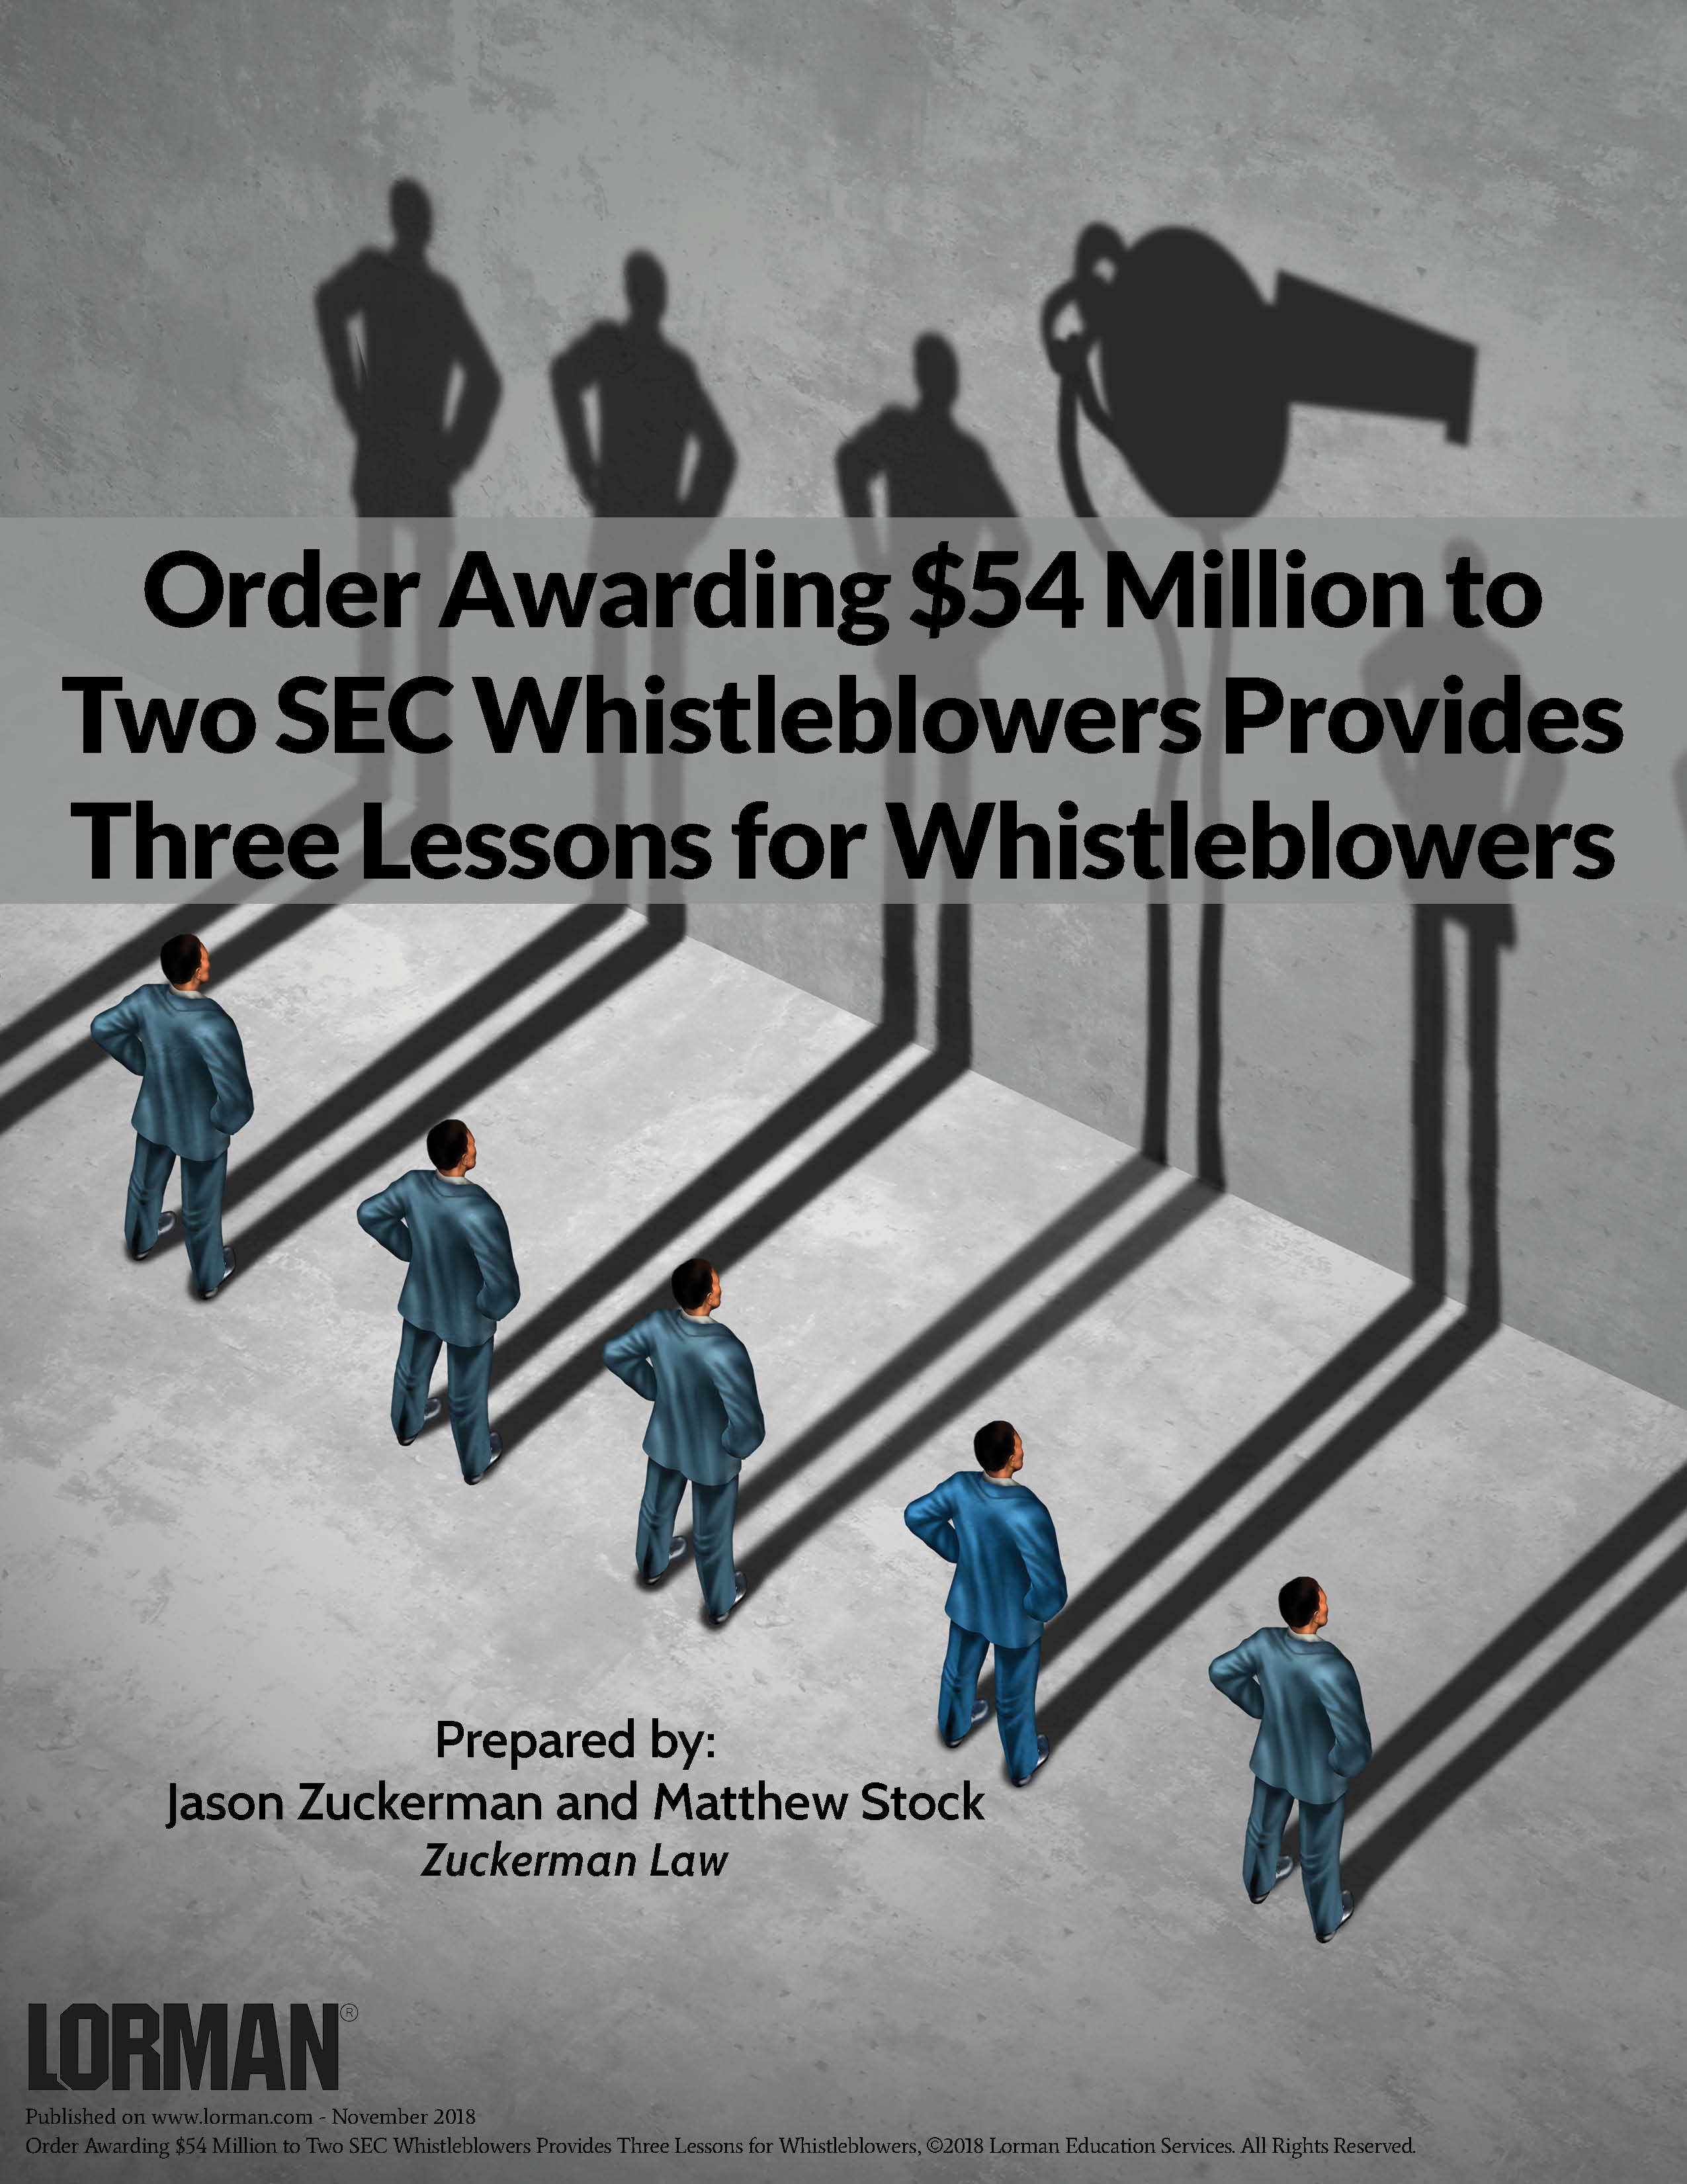 Order Awarding $54 Million to Two SEC Whistleblowers Provides Three Lessons for Whistleblowers